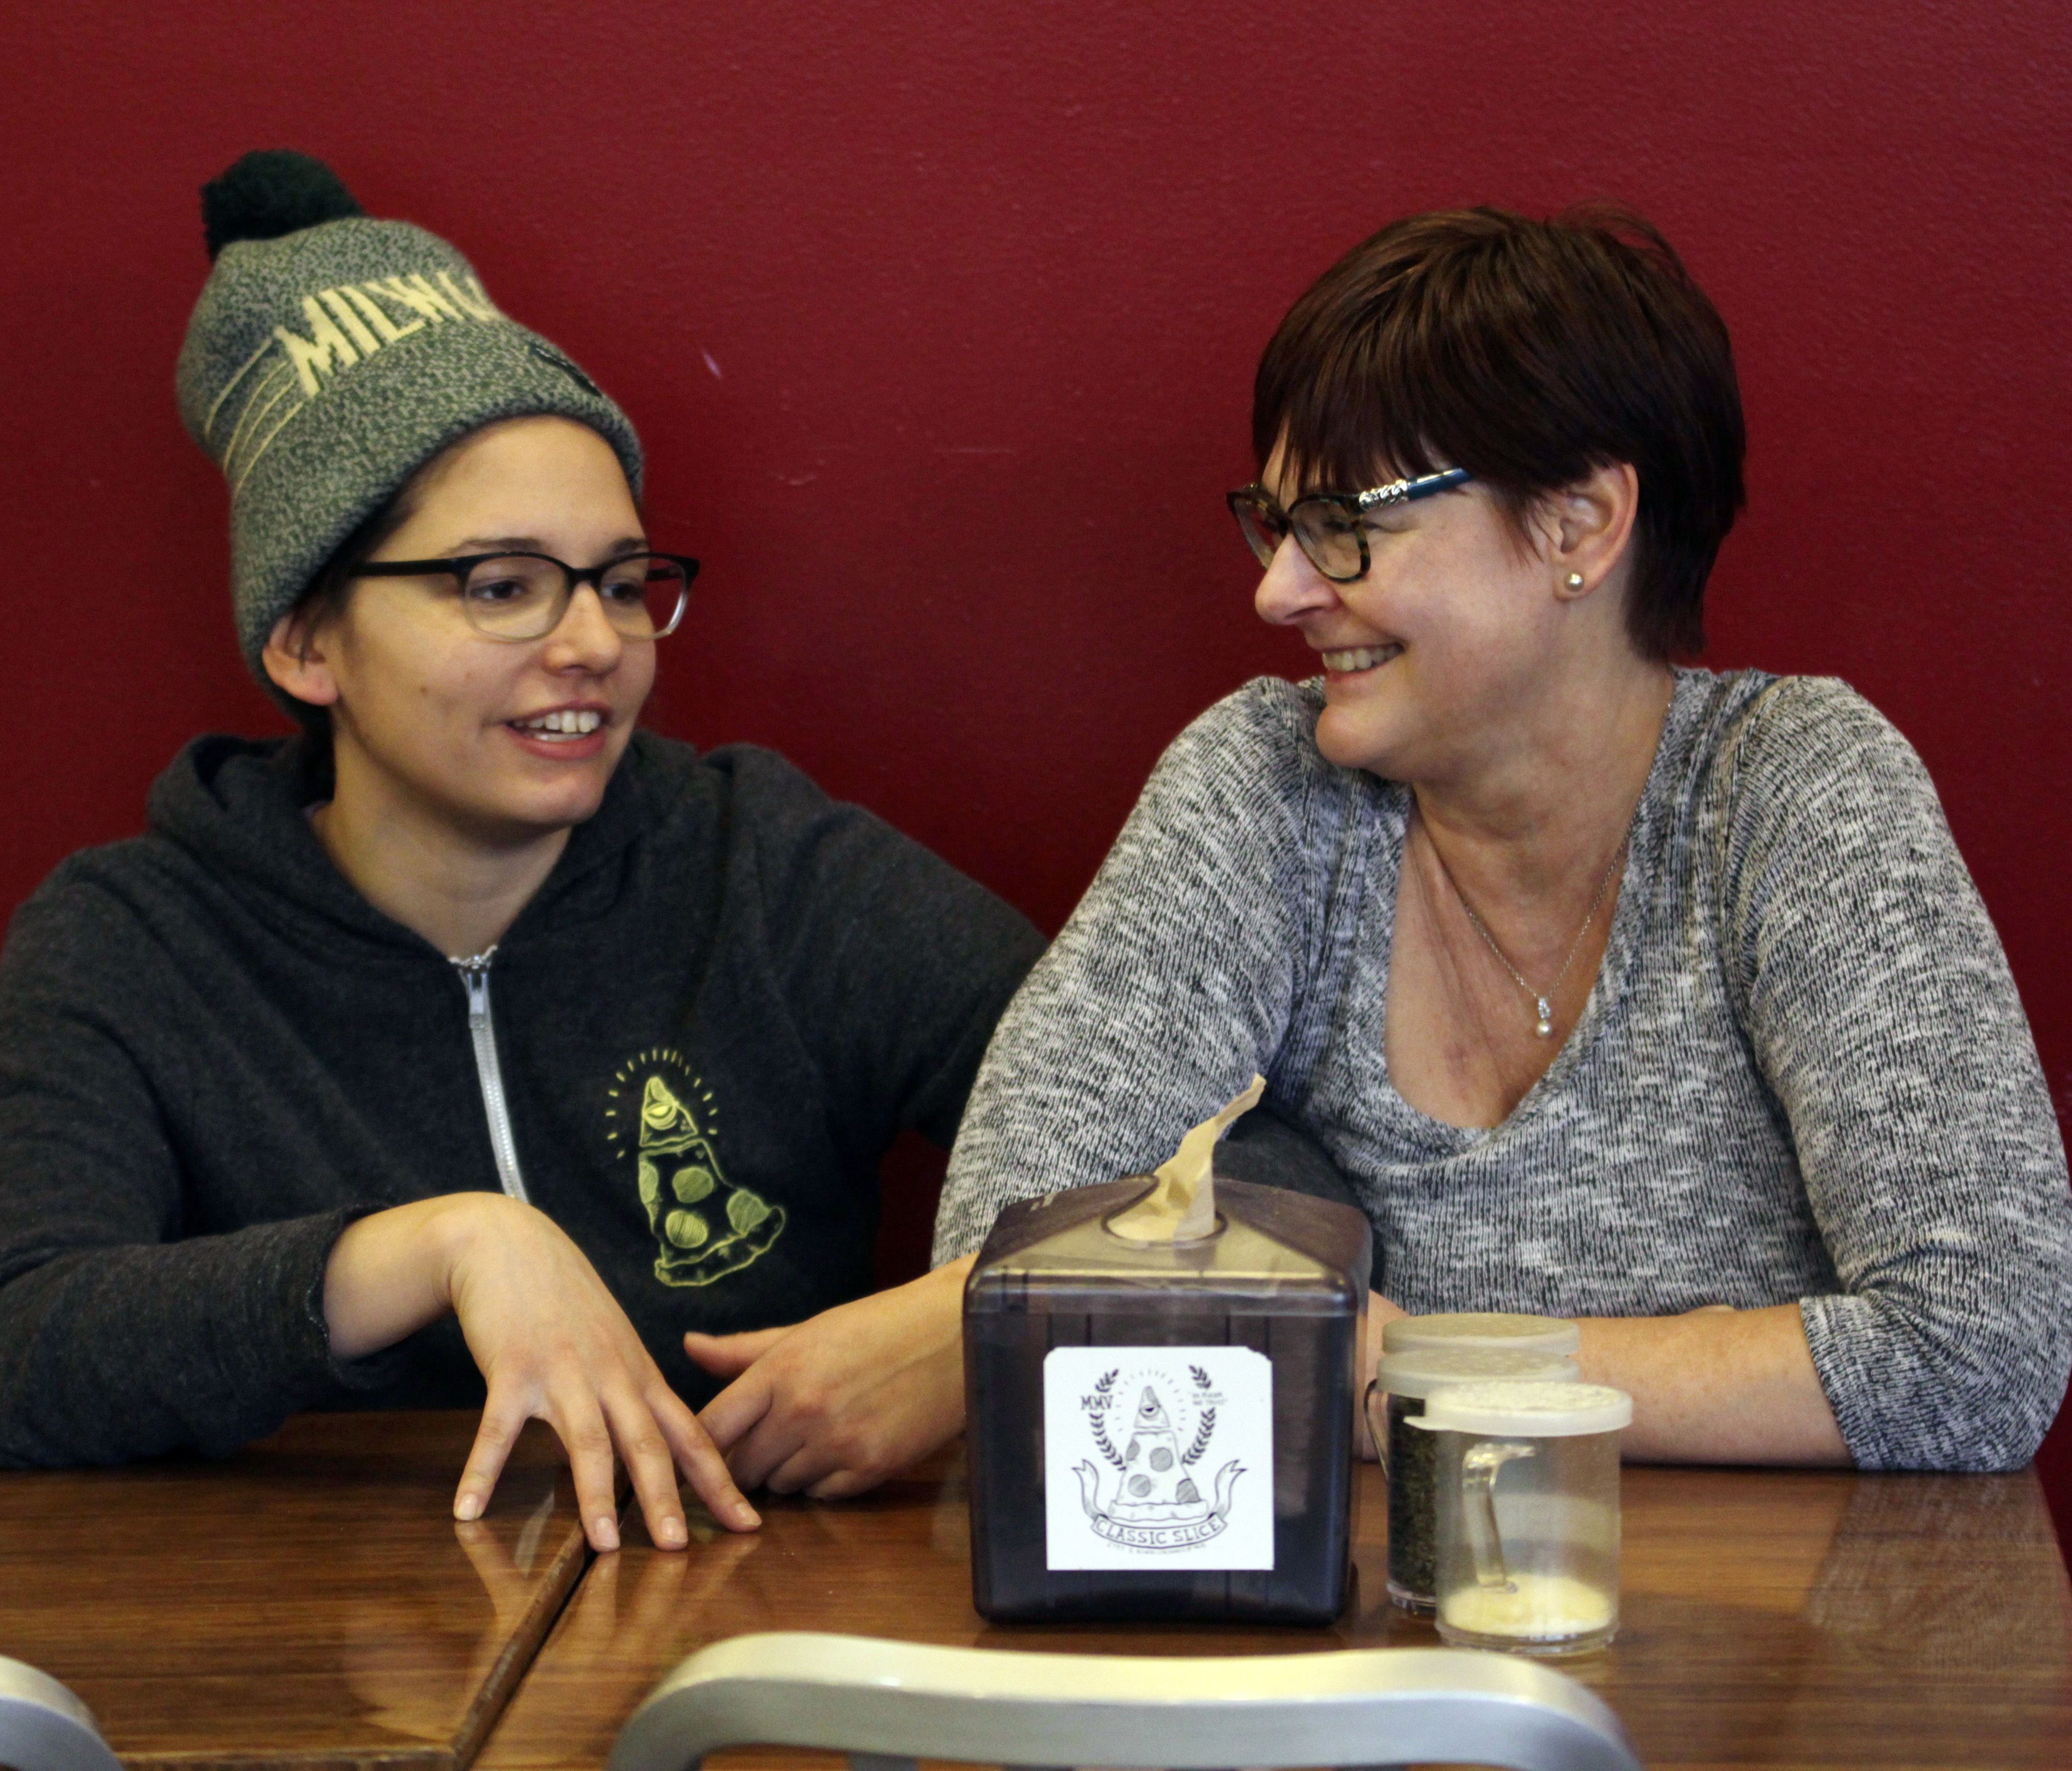 Andrea Ledesma, left, talks with her mom, Cheryl Romanowski, at Classic Slice pizza restaurant, where Ledesma works, in Milwaukee. Ledesma, 28, says her parents owned a house and were raising kids by her age. Not so for her.